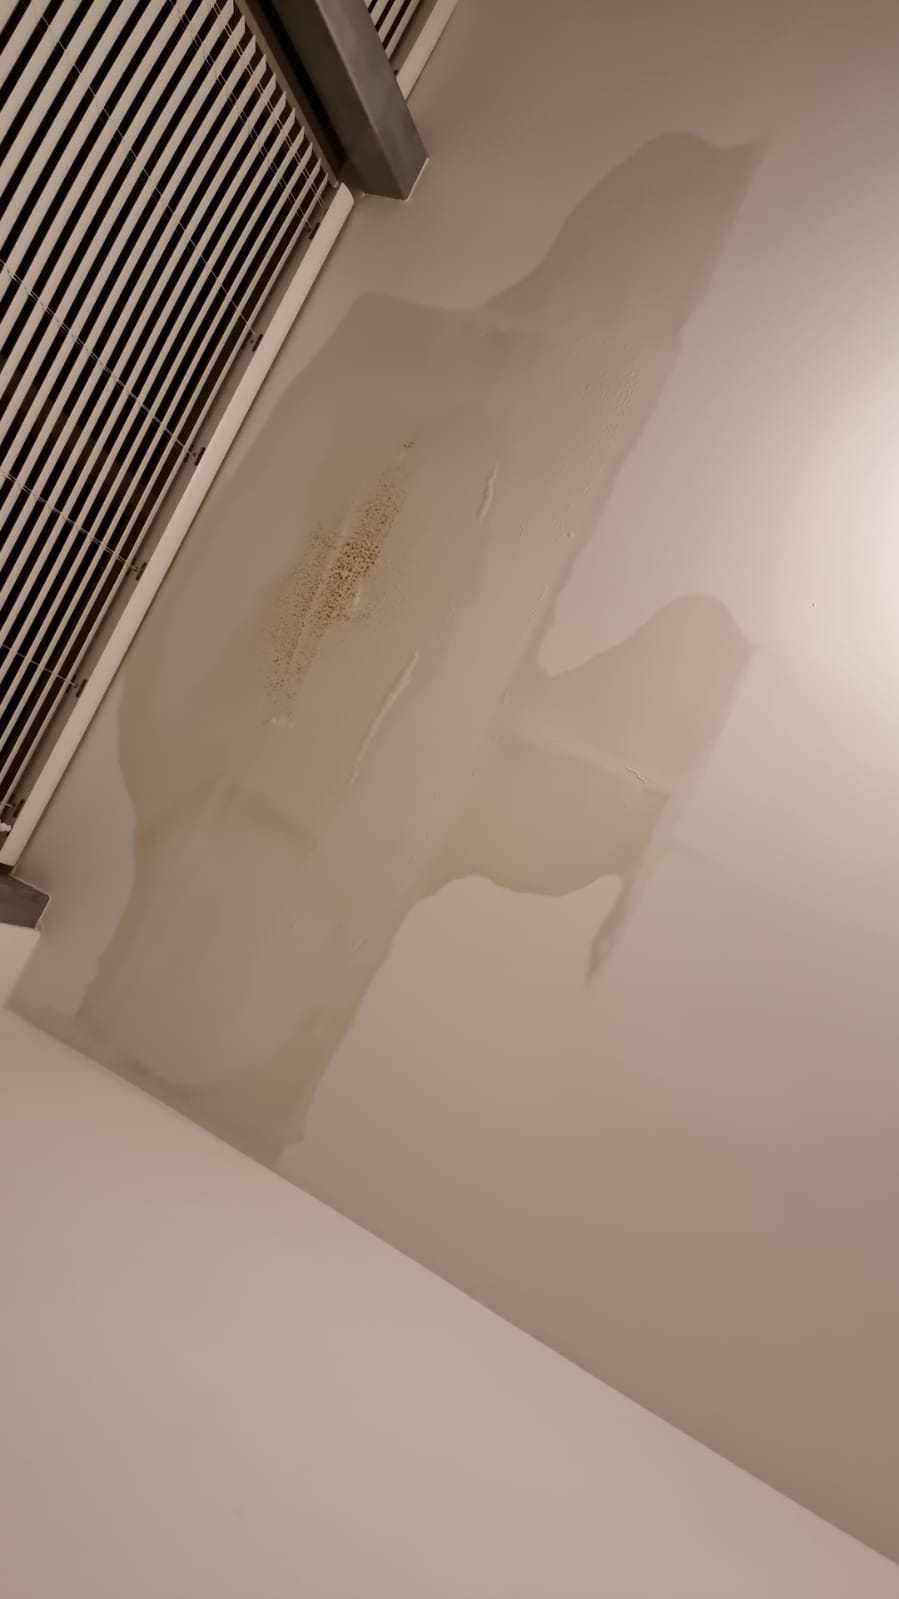 A photo showing leaks and water damage at the housing block